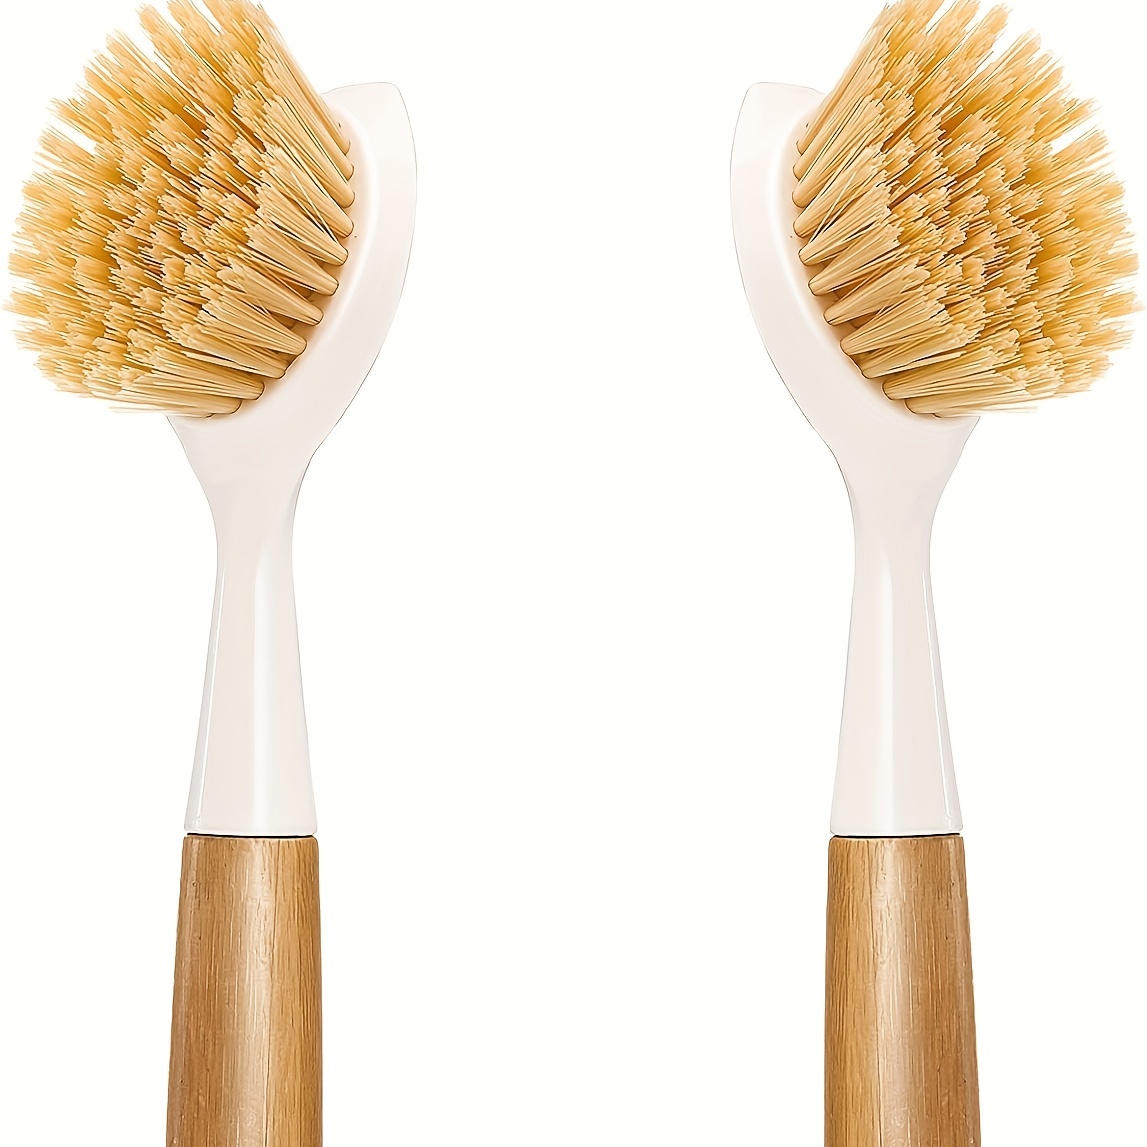 Bamboo Dish Scrub Brushes, Kitchen Wooden Cleaning Scrubbers for Washing  Cast Iron Pan/Pot, Natural Sisal Bristles - AliExpress